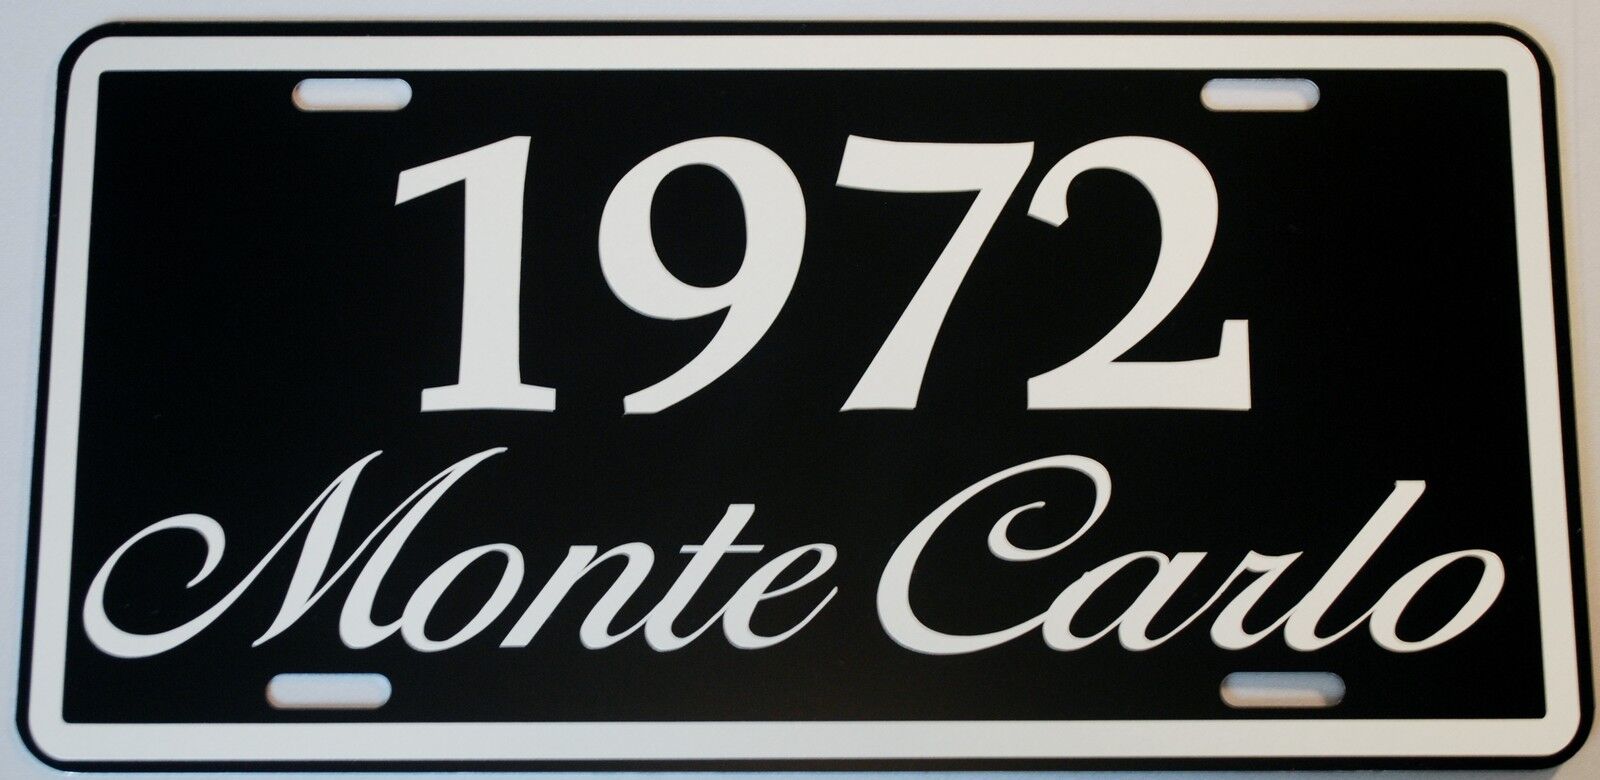 1972 72 MONTE CARLO METAL LICENSE PLATE 350 400 454 SS LOWRIDER CHEVY